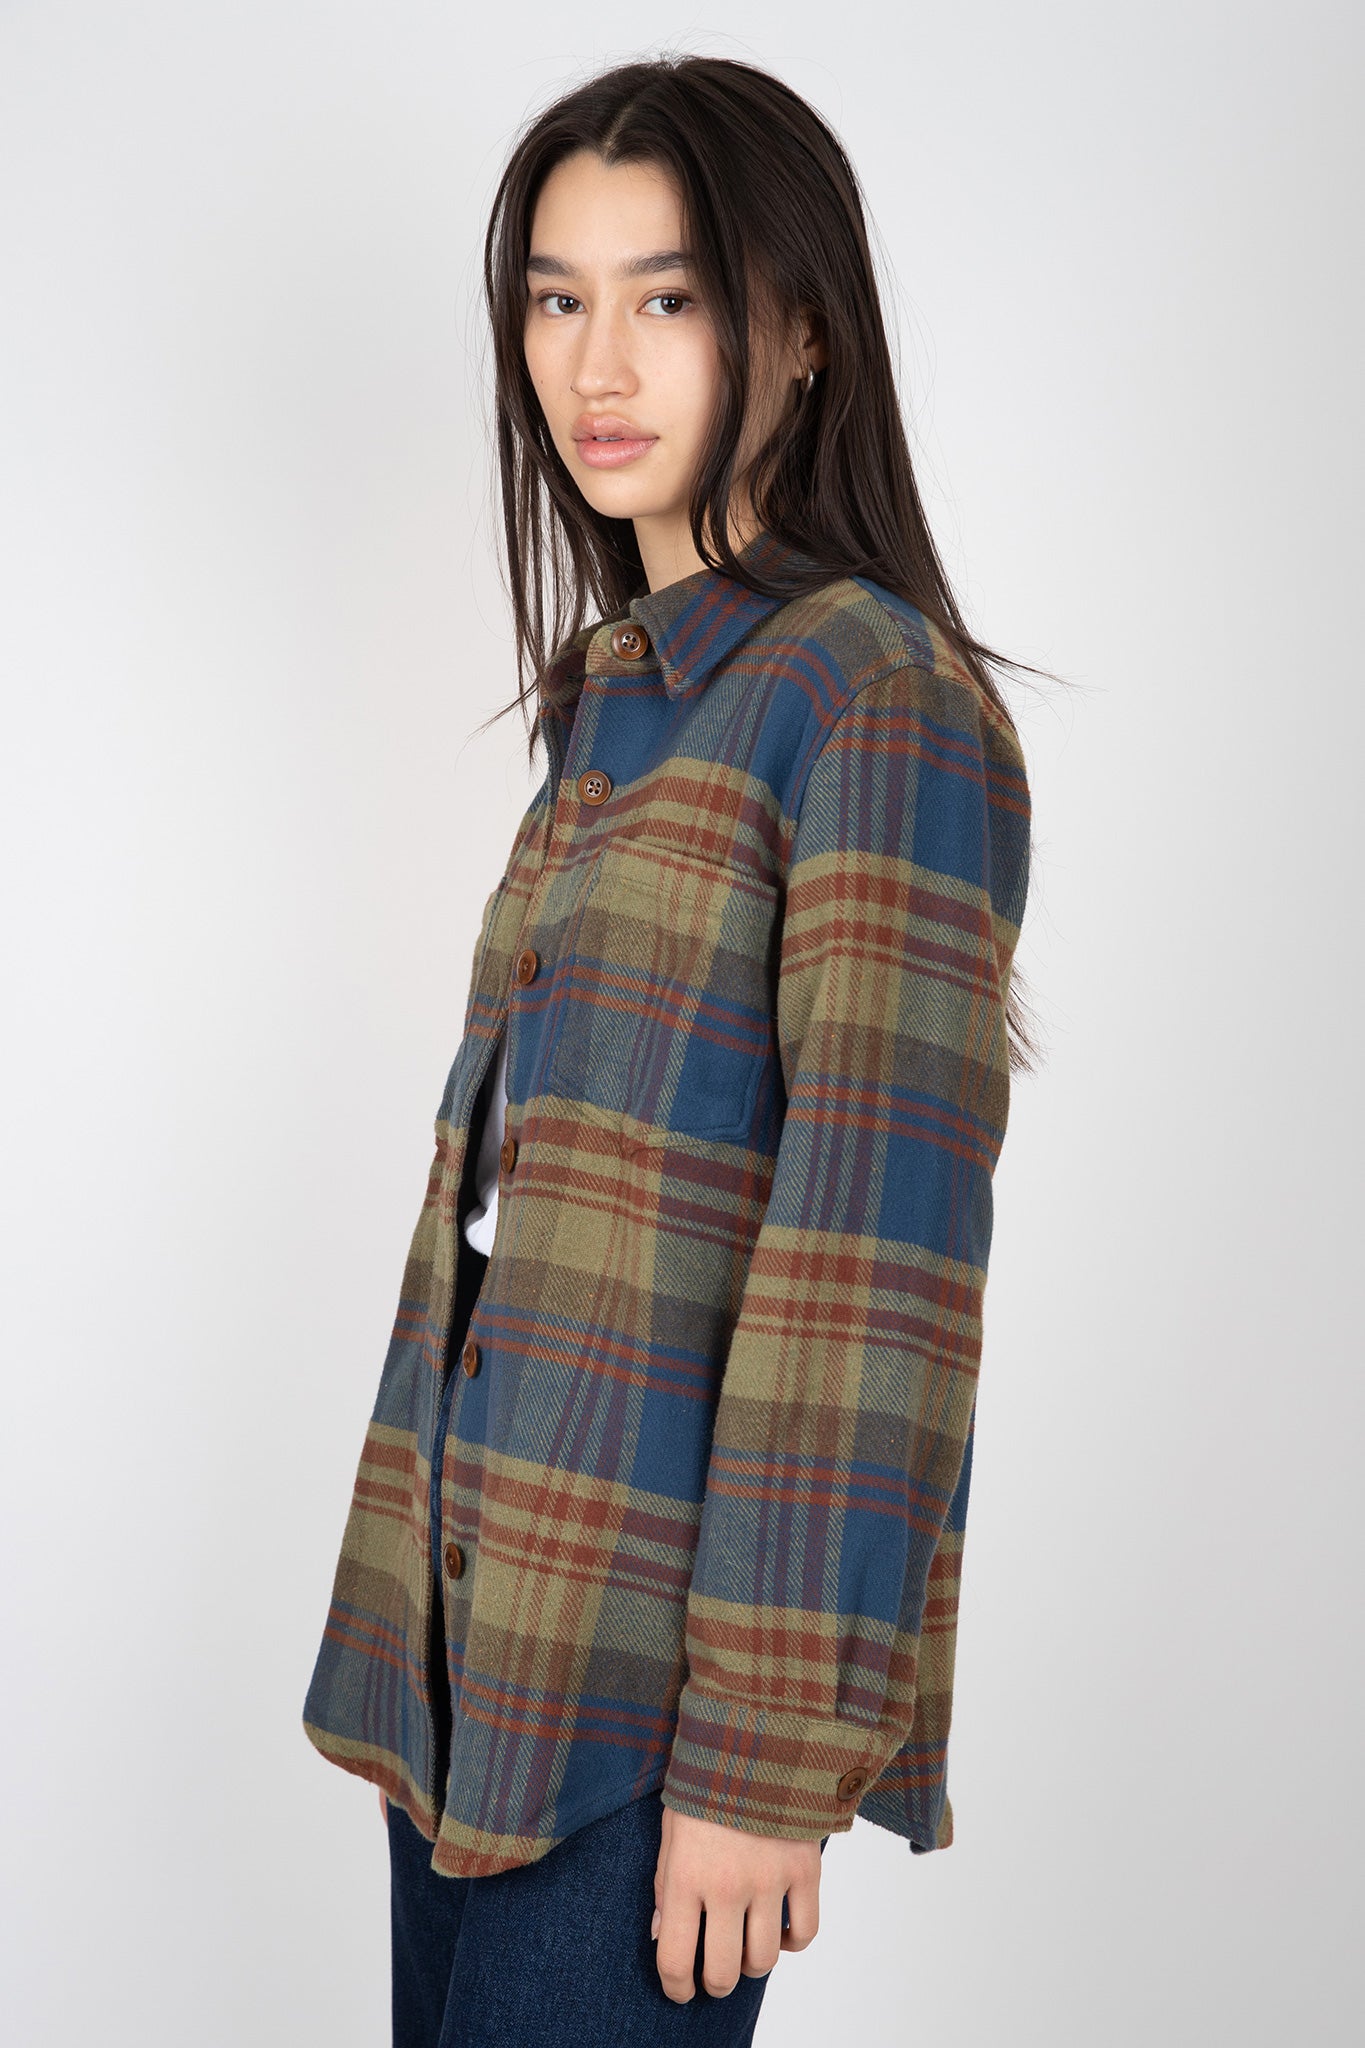 The-Great-The-Craftsman-Shirt-Jacket-Sequoia-Plaid